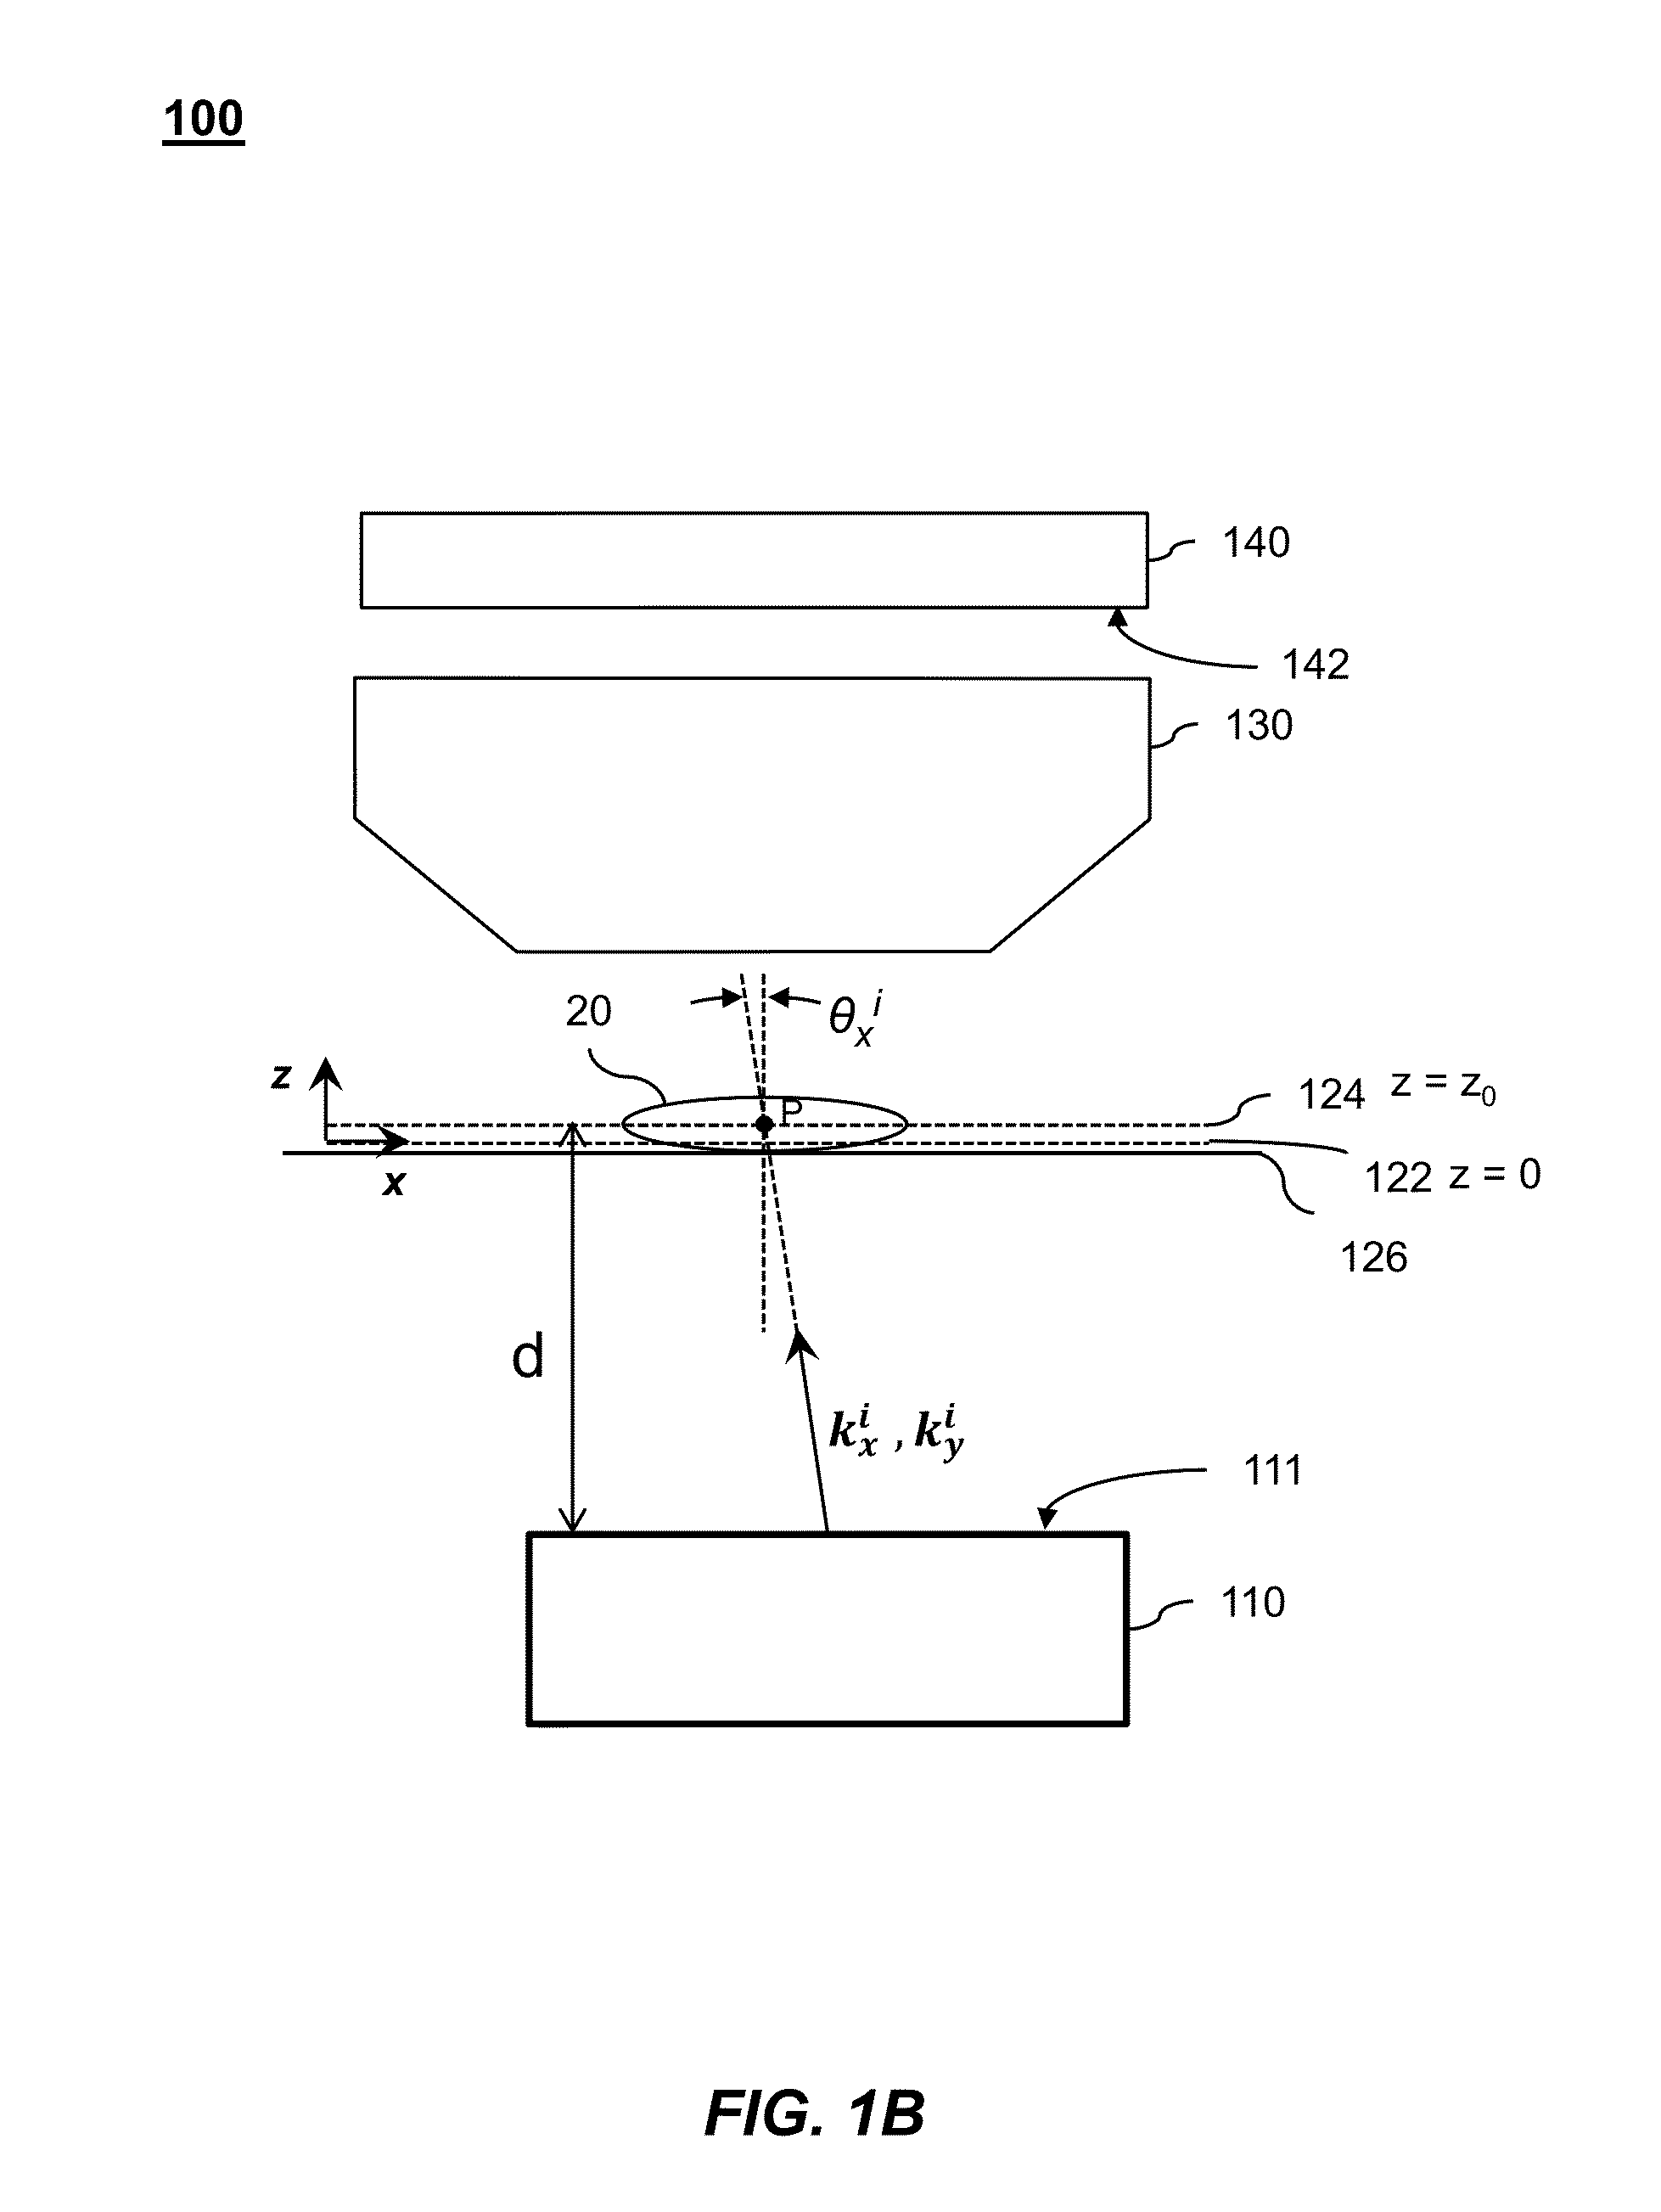 Fourier Ptychographic Imaging Systems, Devices, and Methods